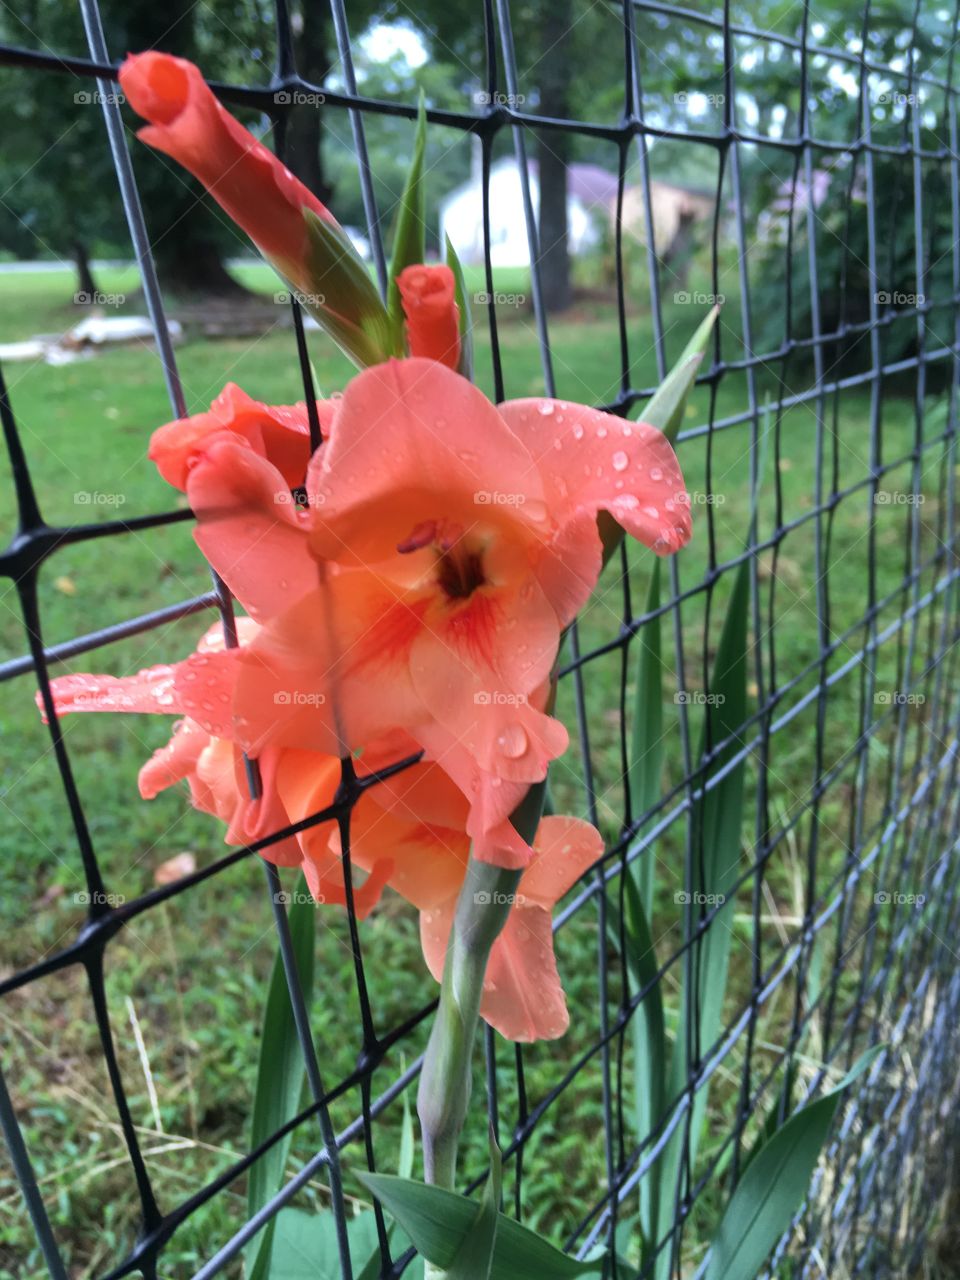 Another new bloom and a new color growing happily for the hummingbirds to enjoy 